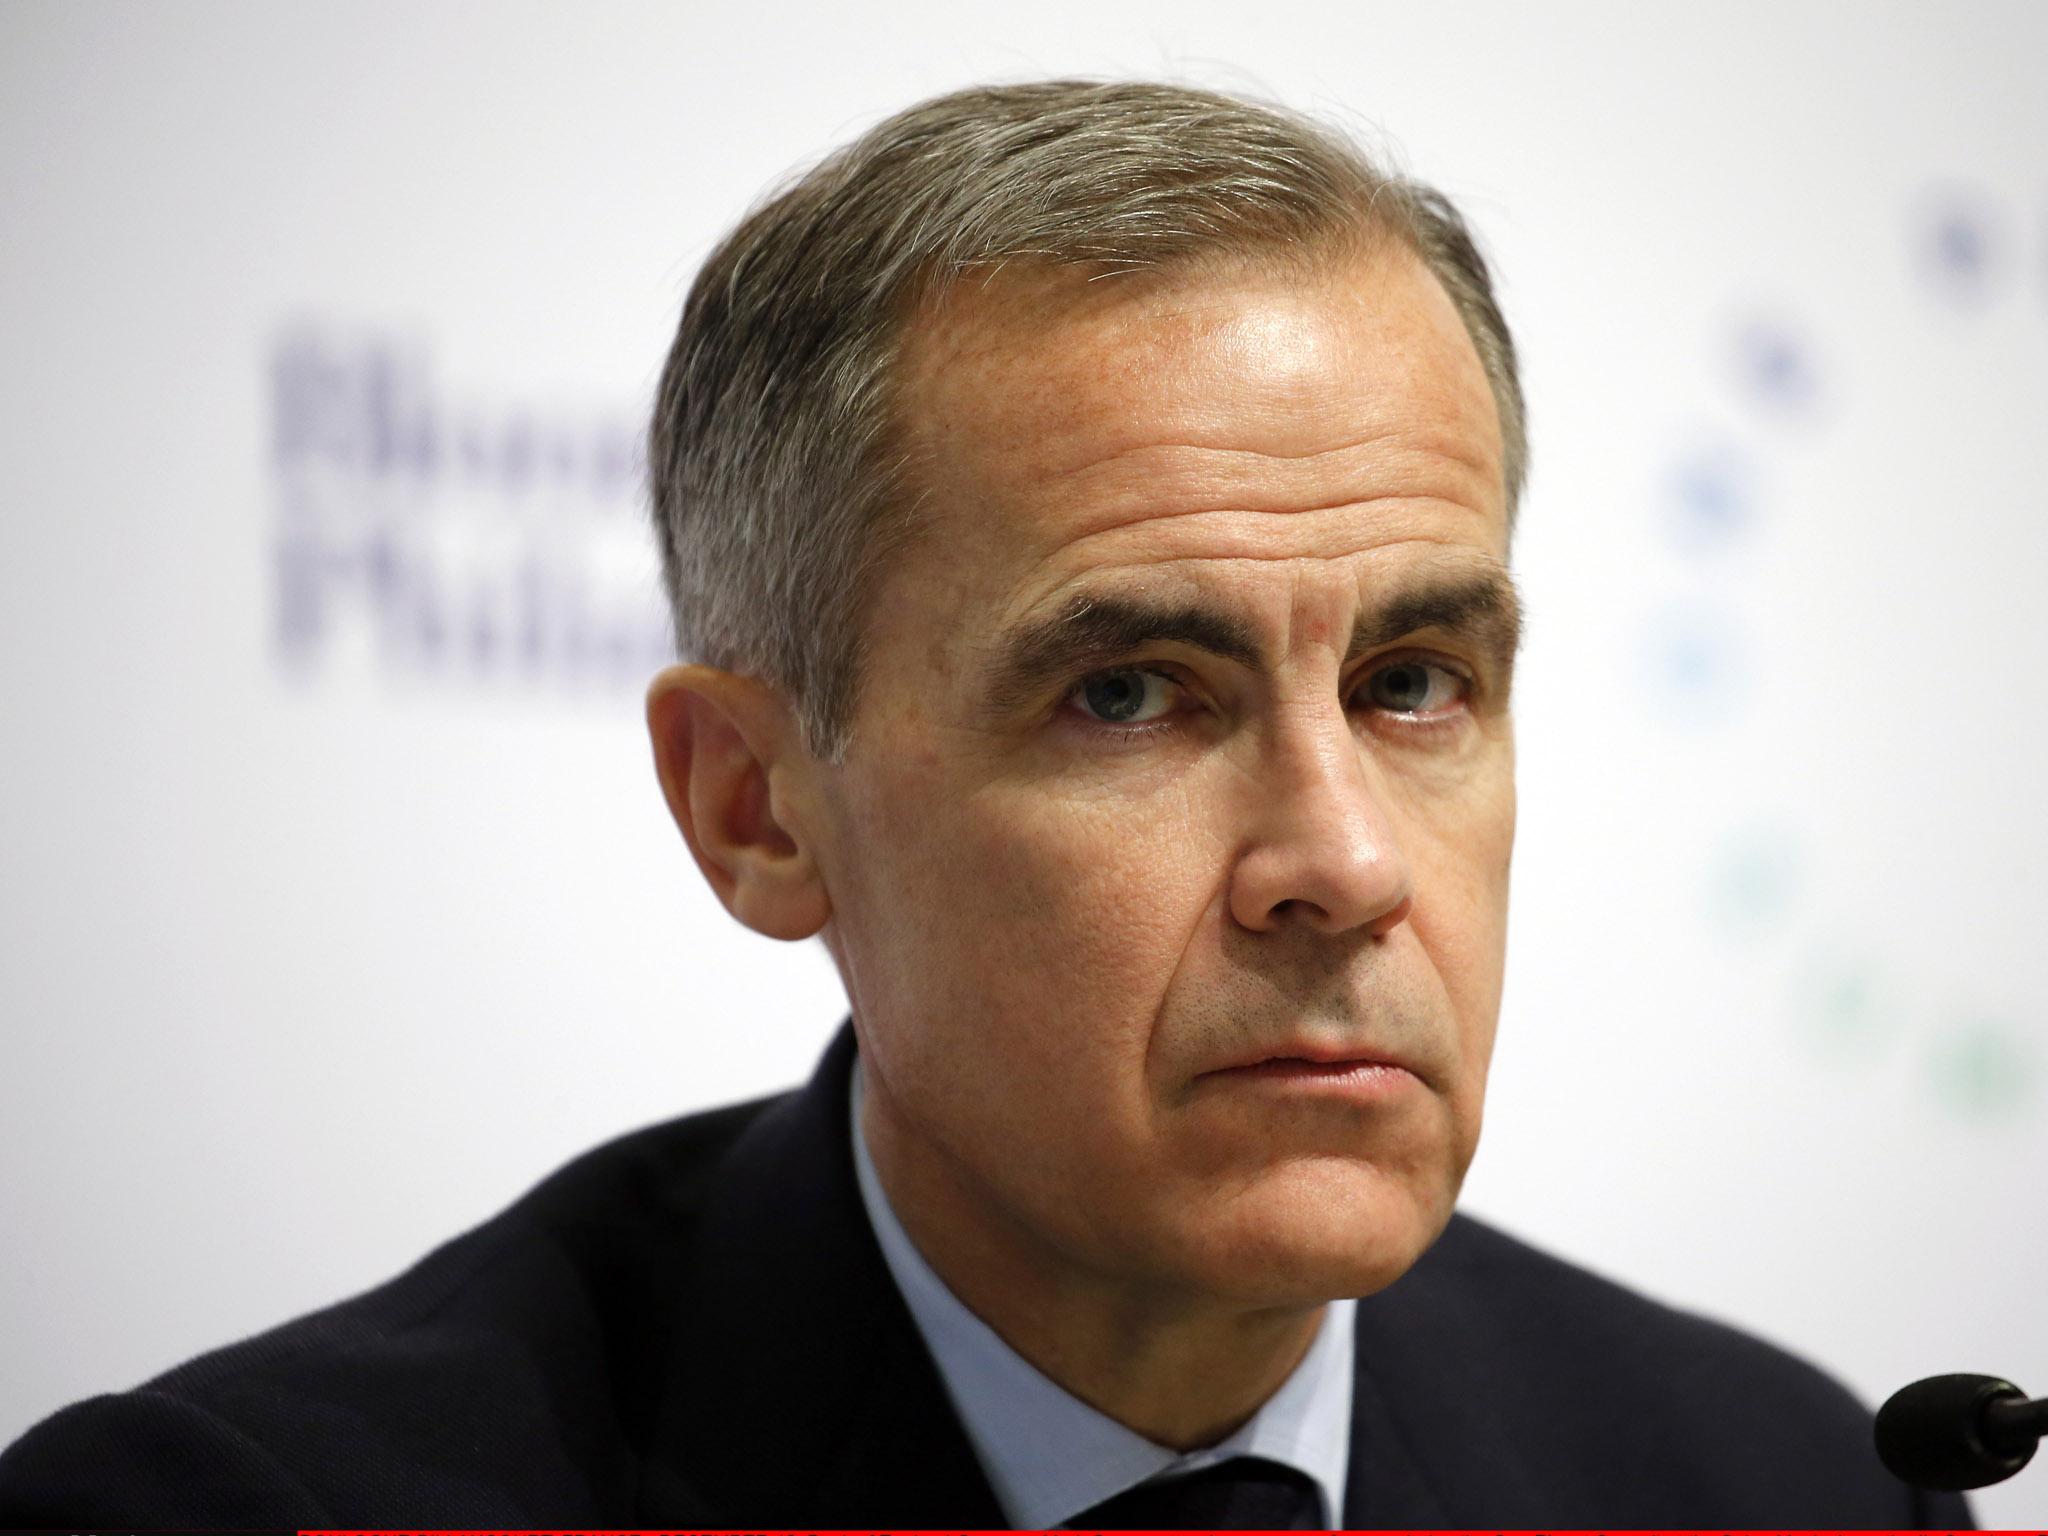 In a speech on leadership Mr Carney said “the need for clarity of mind, thought and communication” from central bankers had been “paramount” in the financial crisis